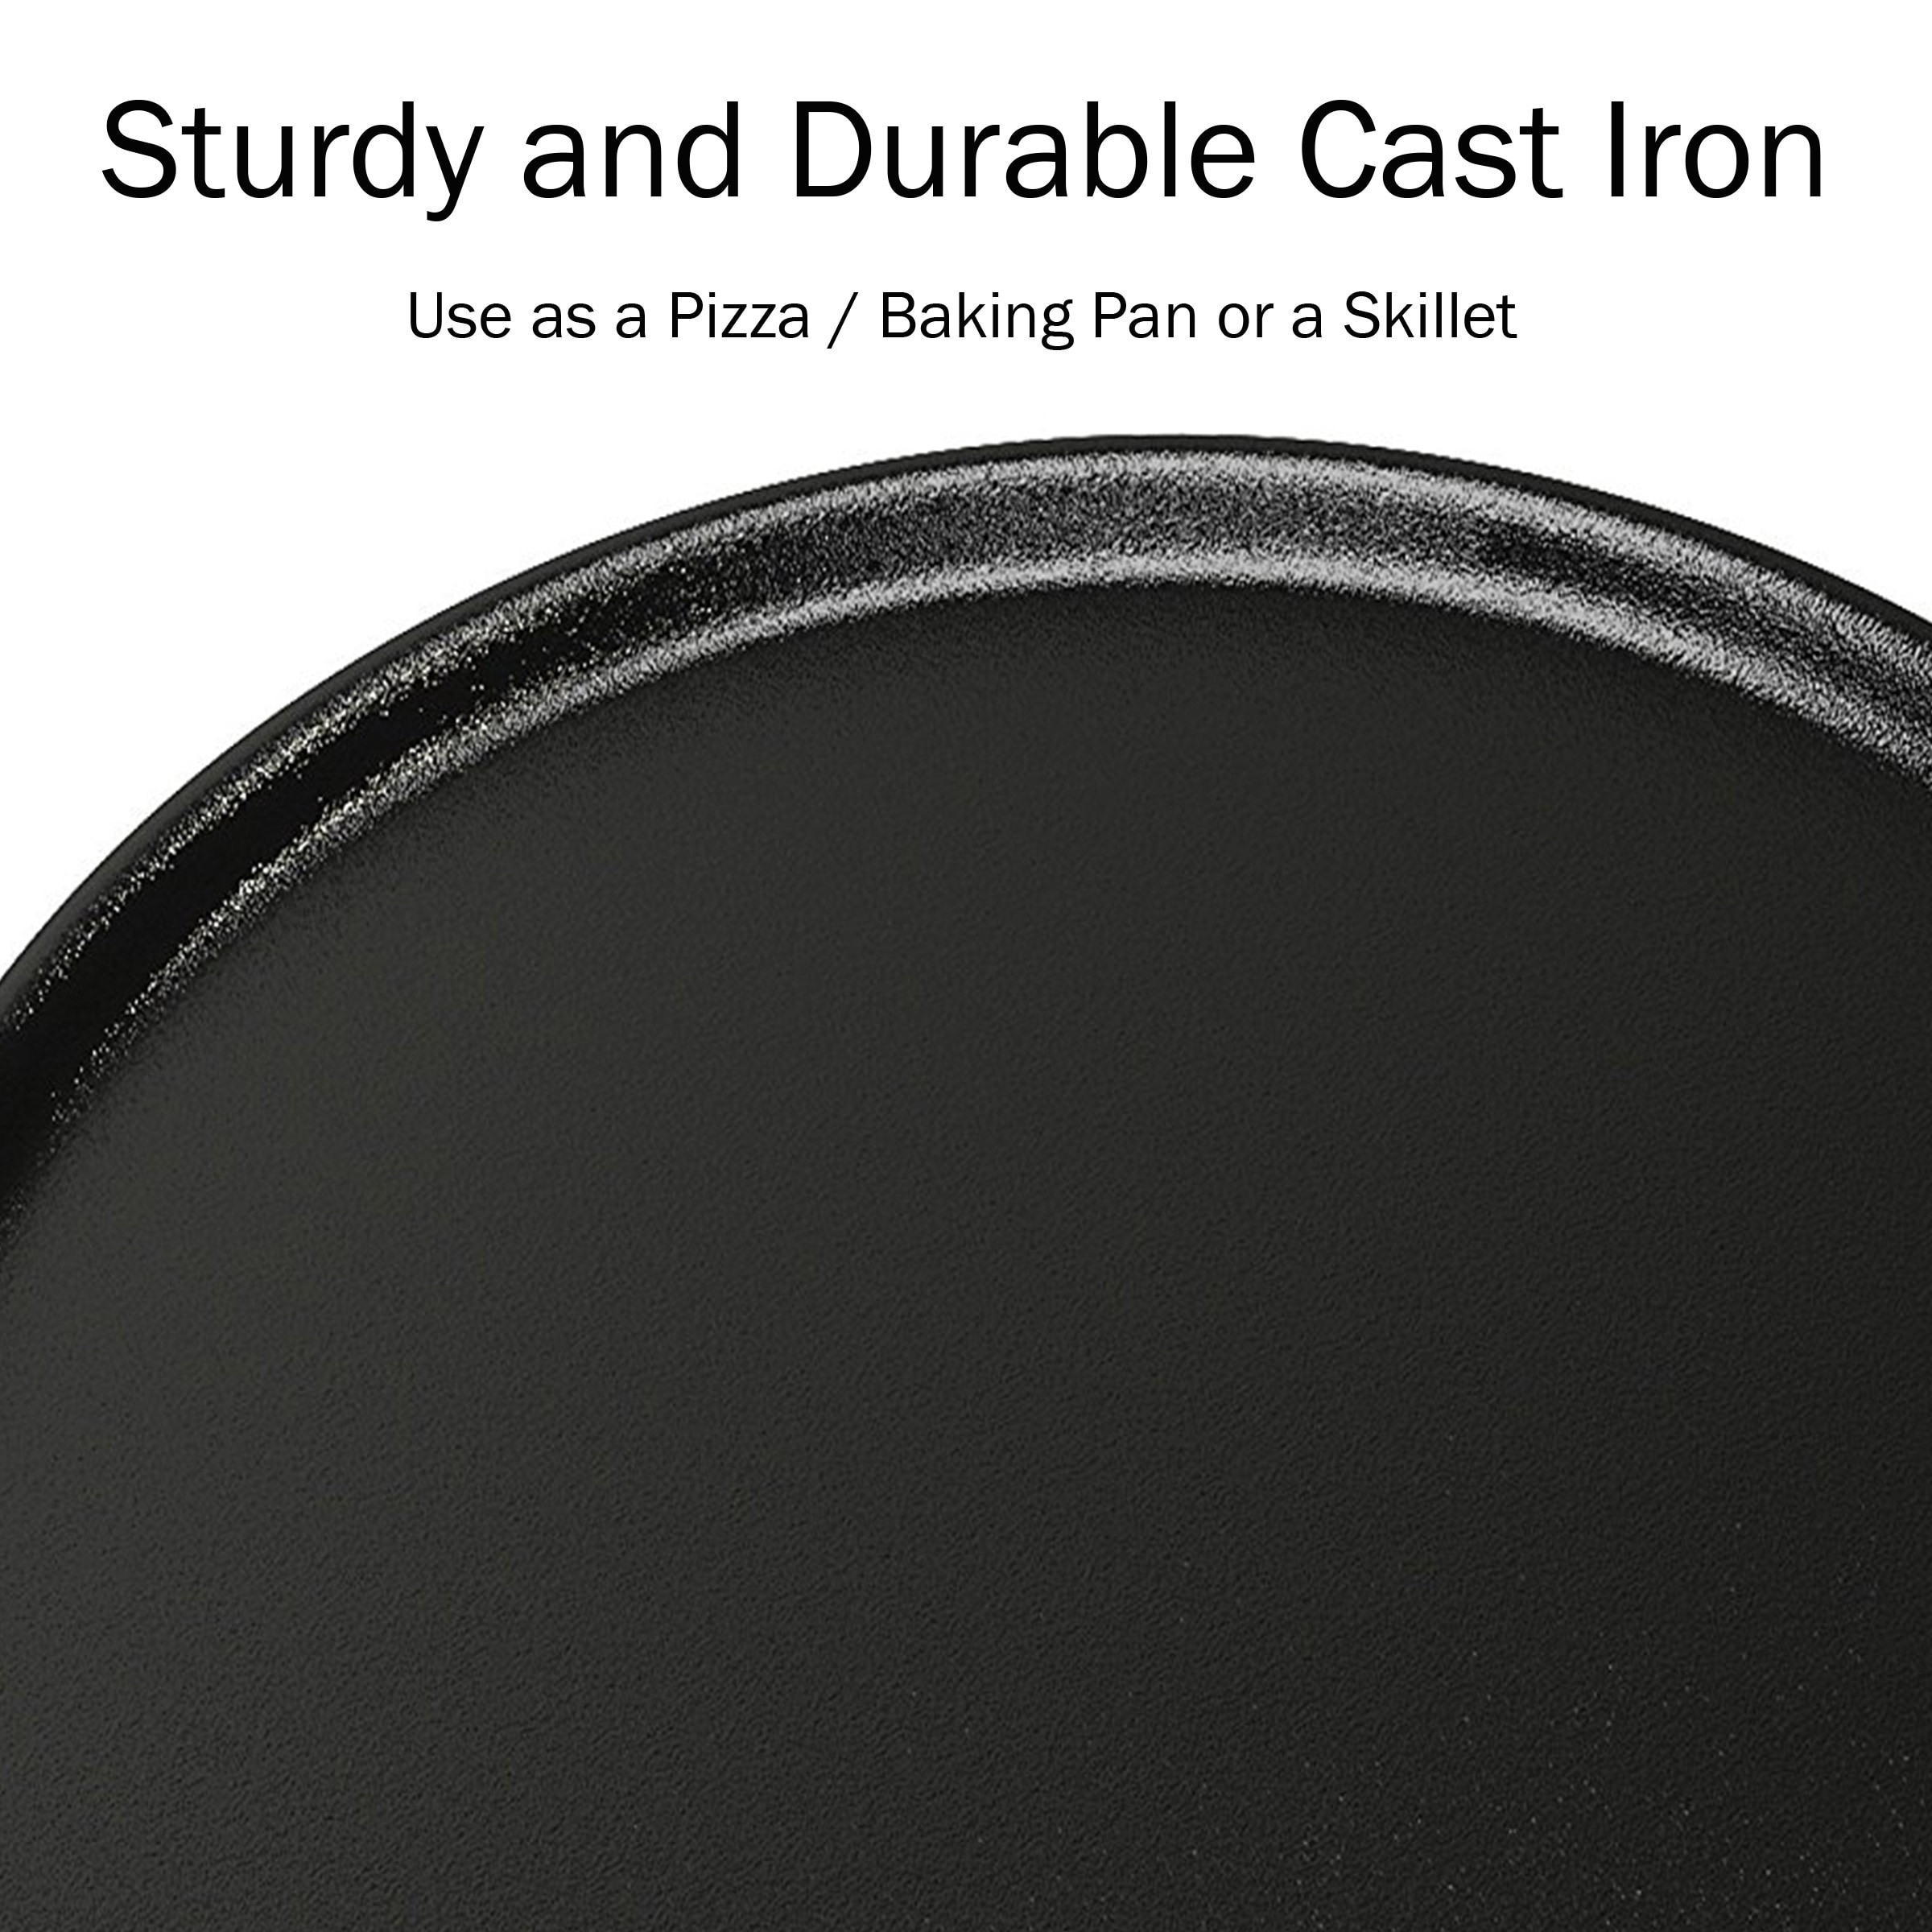 https://ak1.ostkcdn.com/images/products/is/images/direct/d2bd2a1f3dad91e06264bd7b144526e280ace08f/Cast-Iron-Pizza-Pan-14-Inches-Skillet-for-Cooking%2C-Baking%2C-Grilling-Durable-by-Home-Complete.jpg